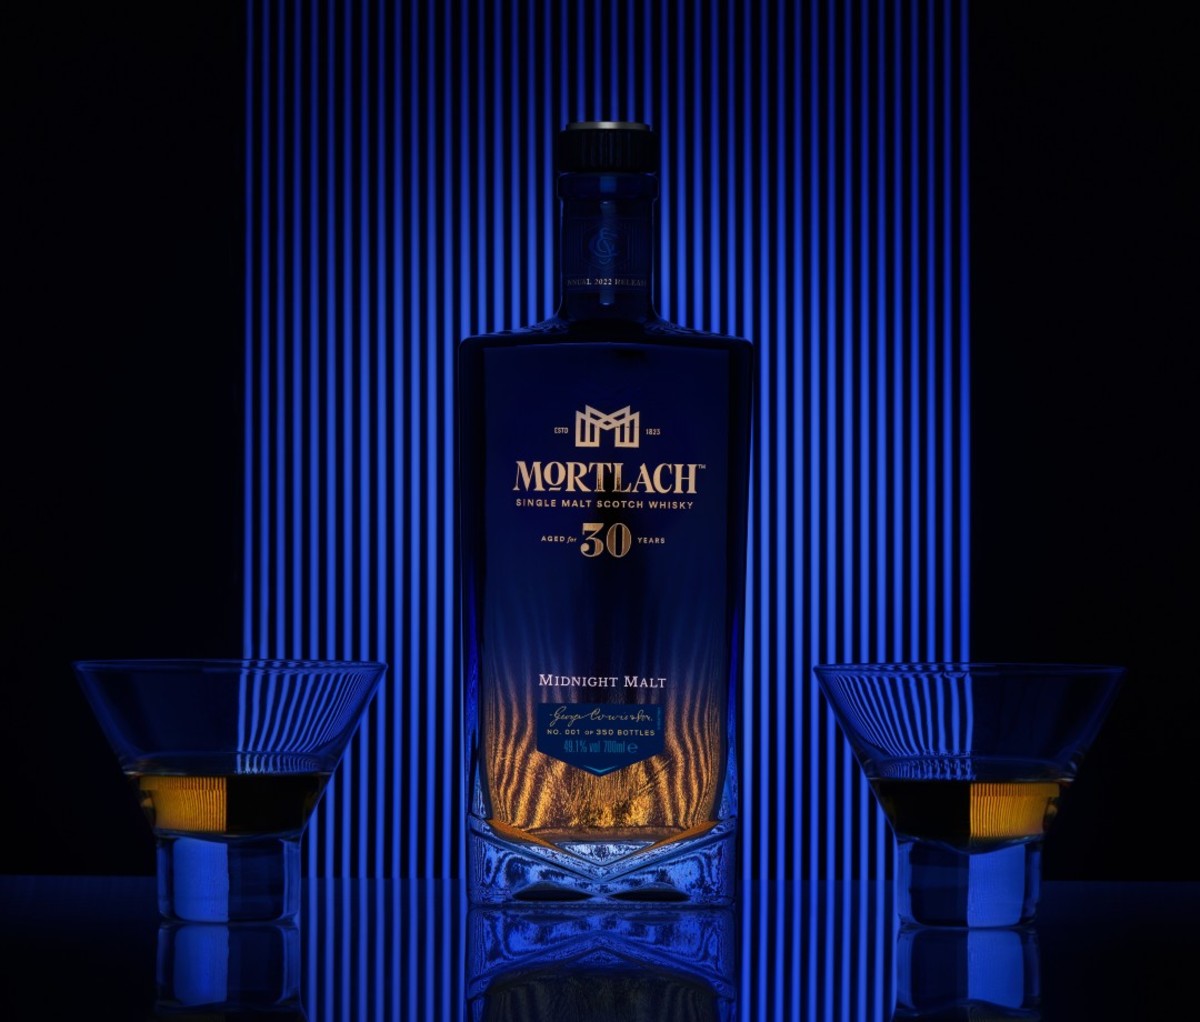 Blue bottle of whiskey called Mortlach 30